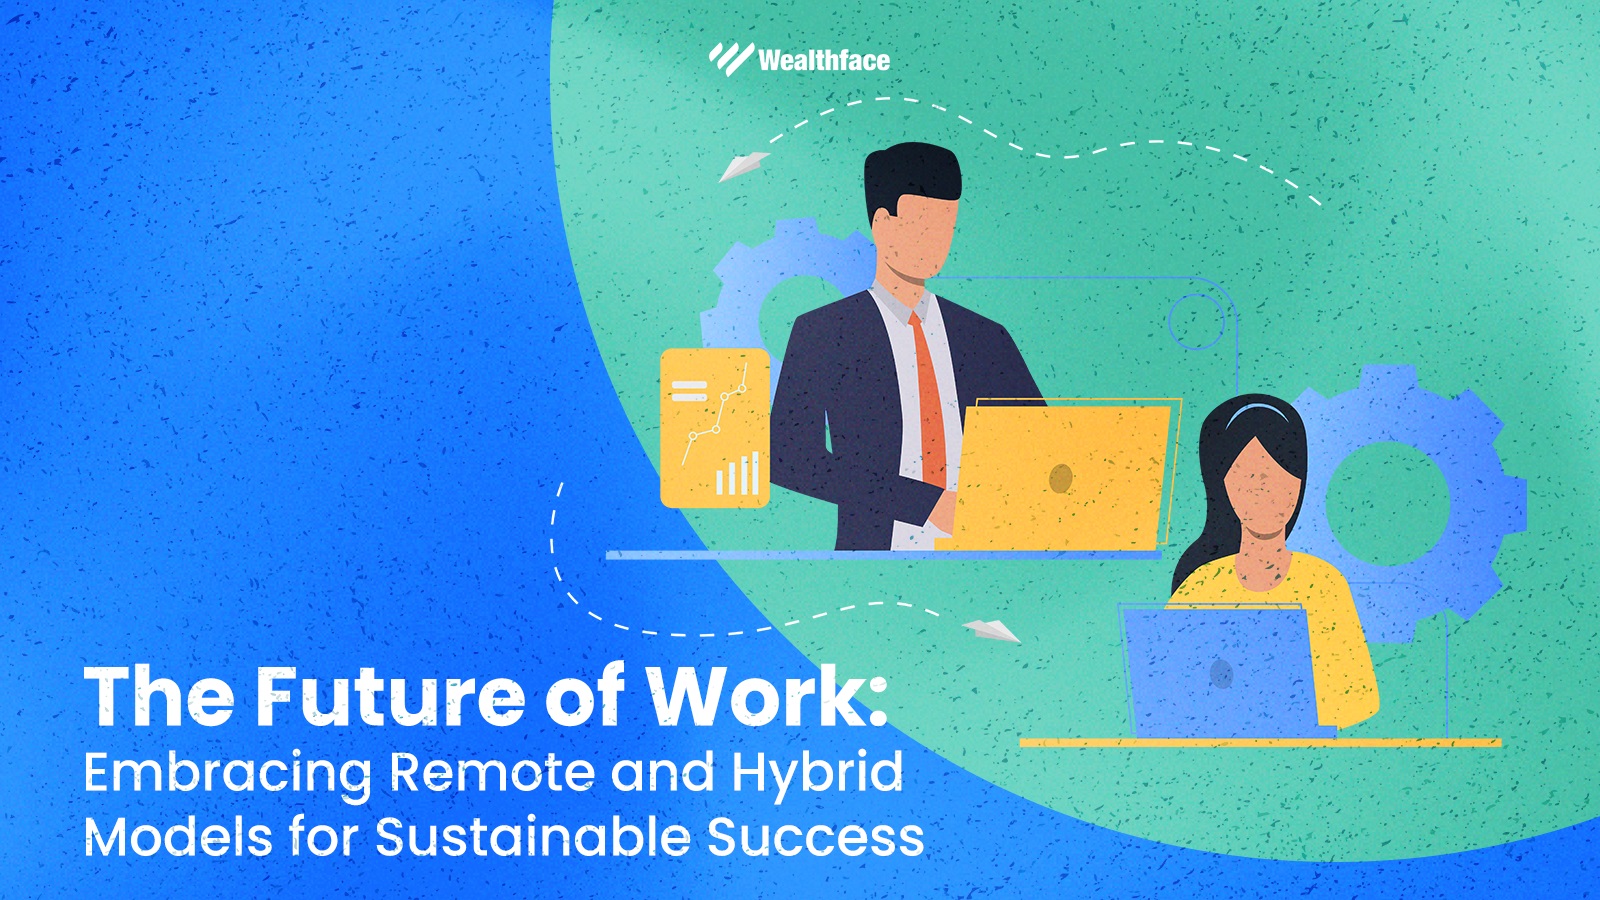 Work’s Future: Embracing Remote & Hybrid Models for Success